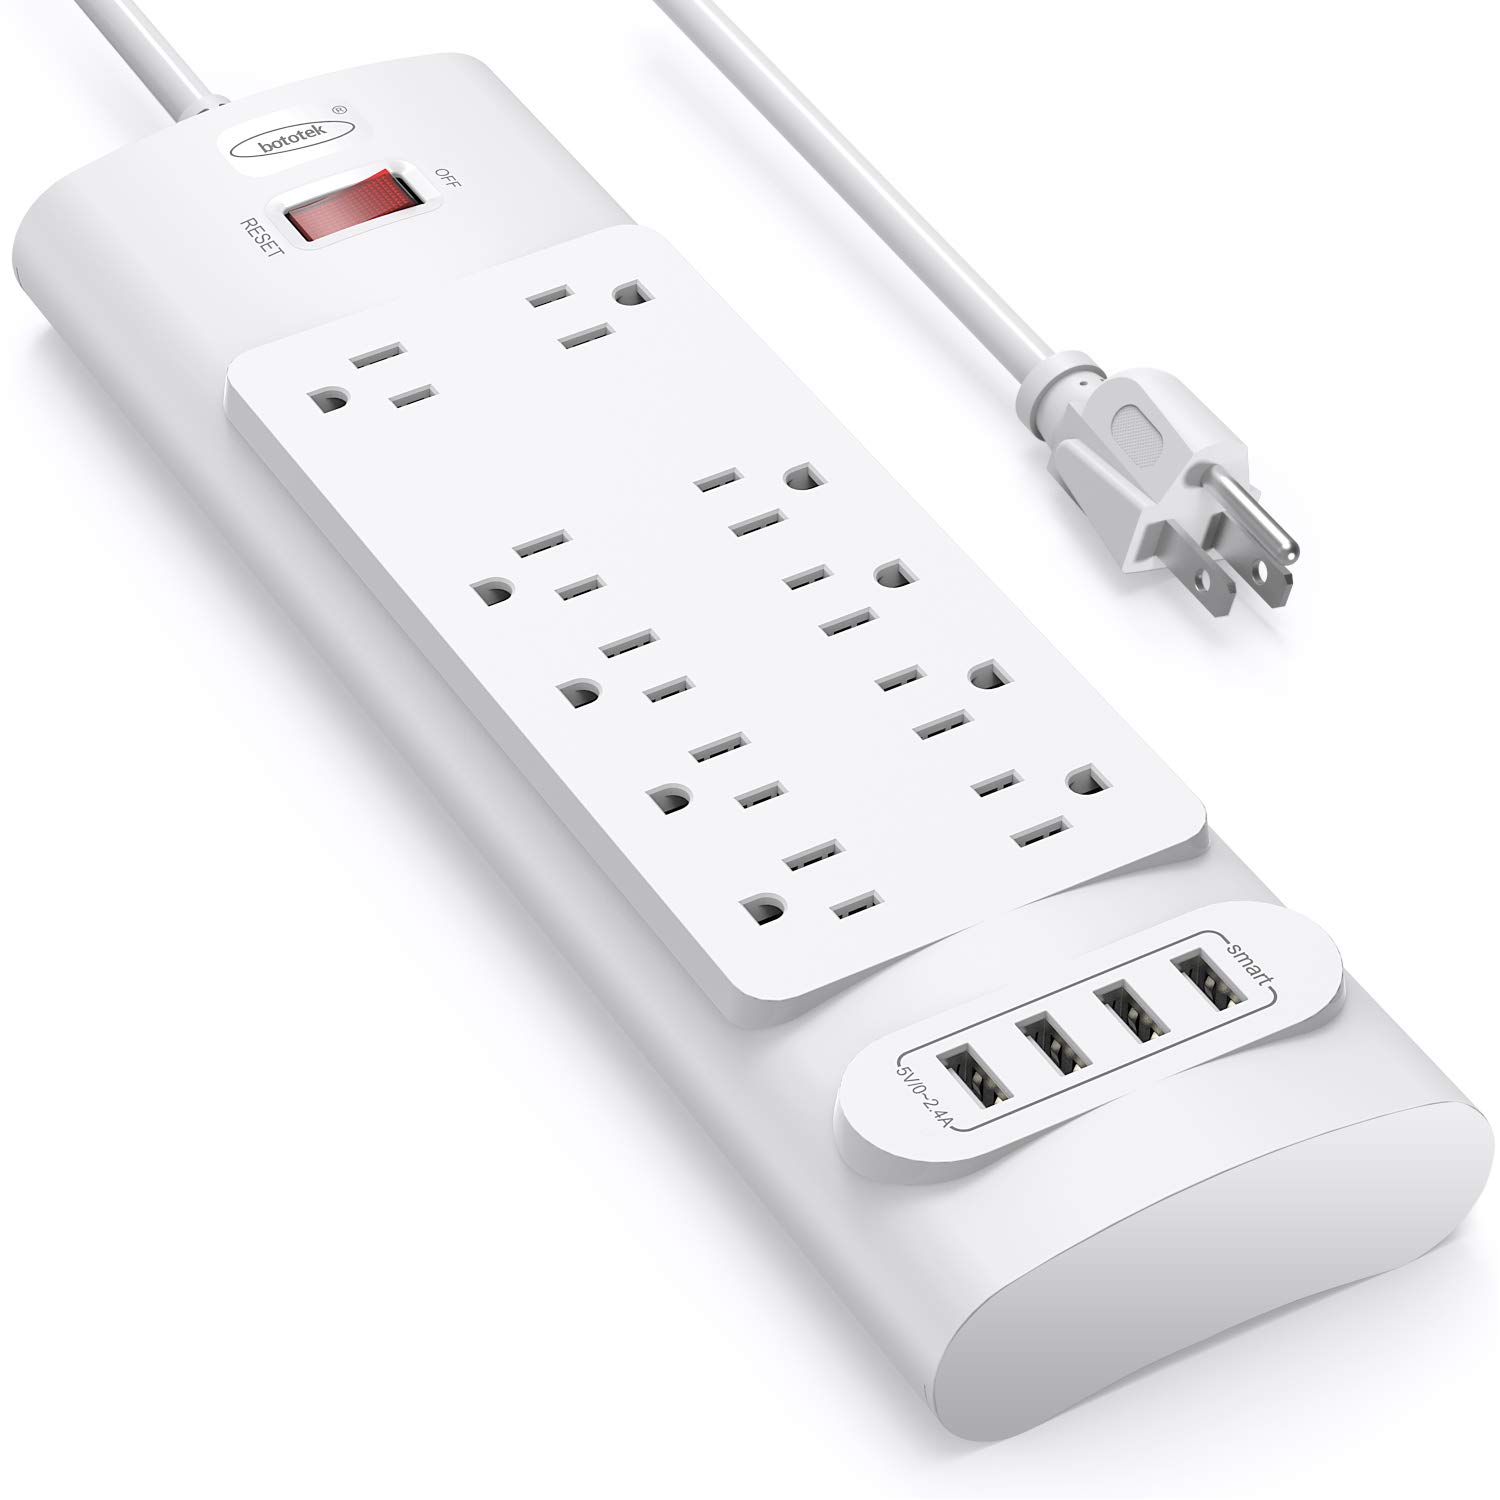 bototek Surge Protector with USB Charging Ports, 10-Outlet